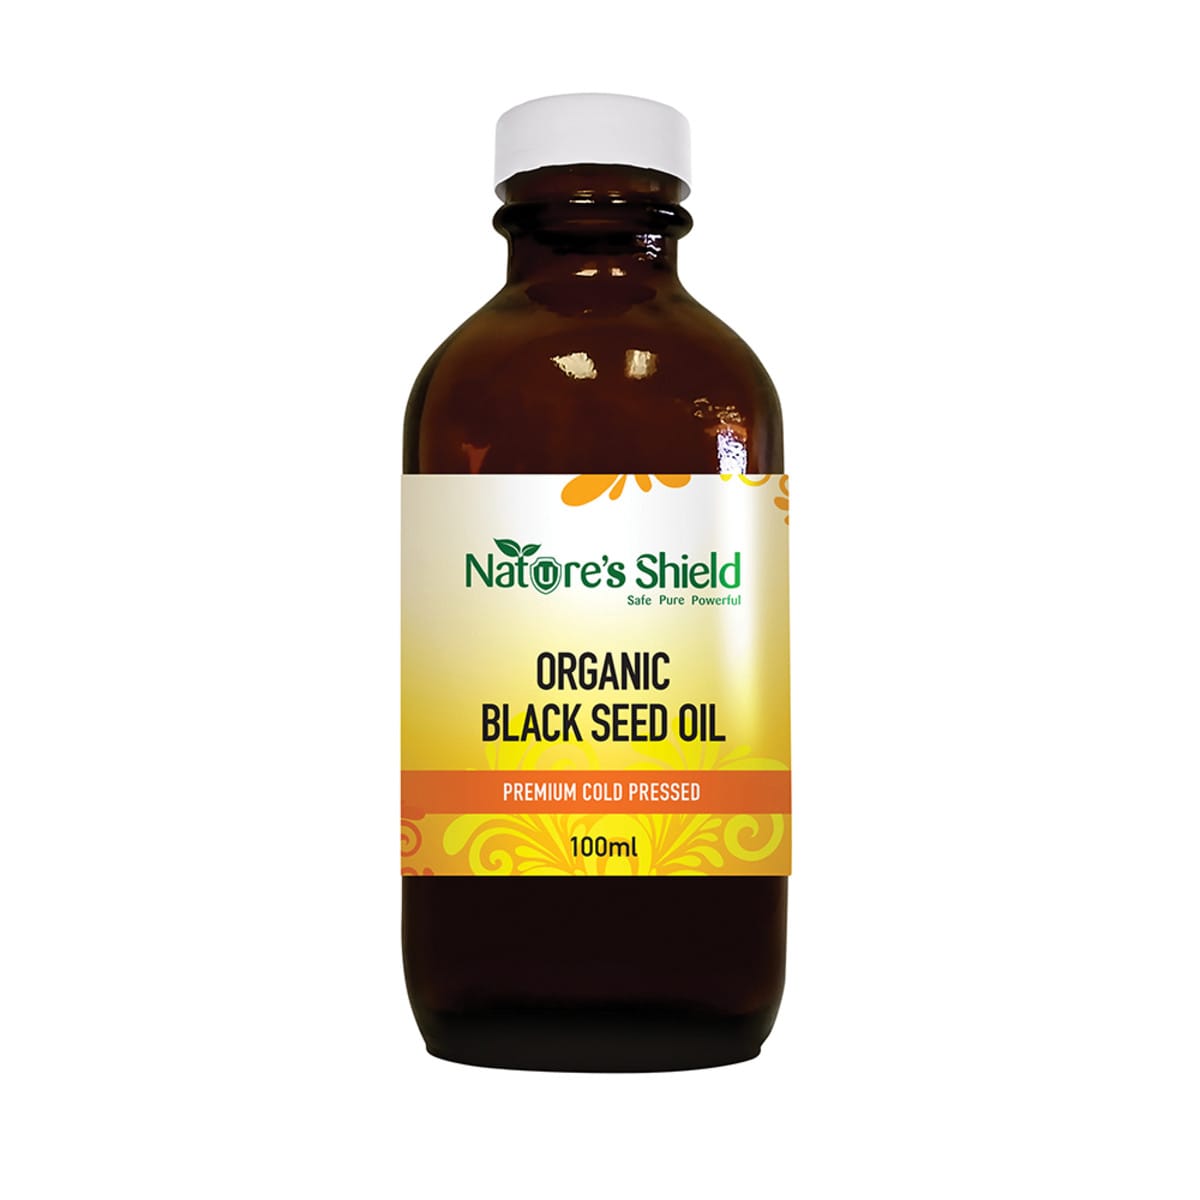 NATURE'S SHIELD - Wild Crafted Black Seed Oil